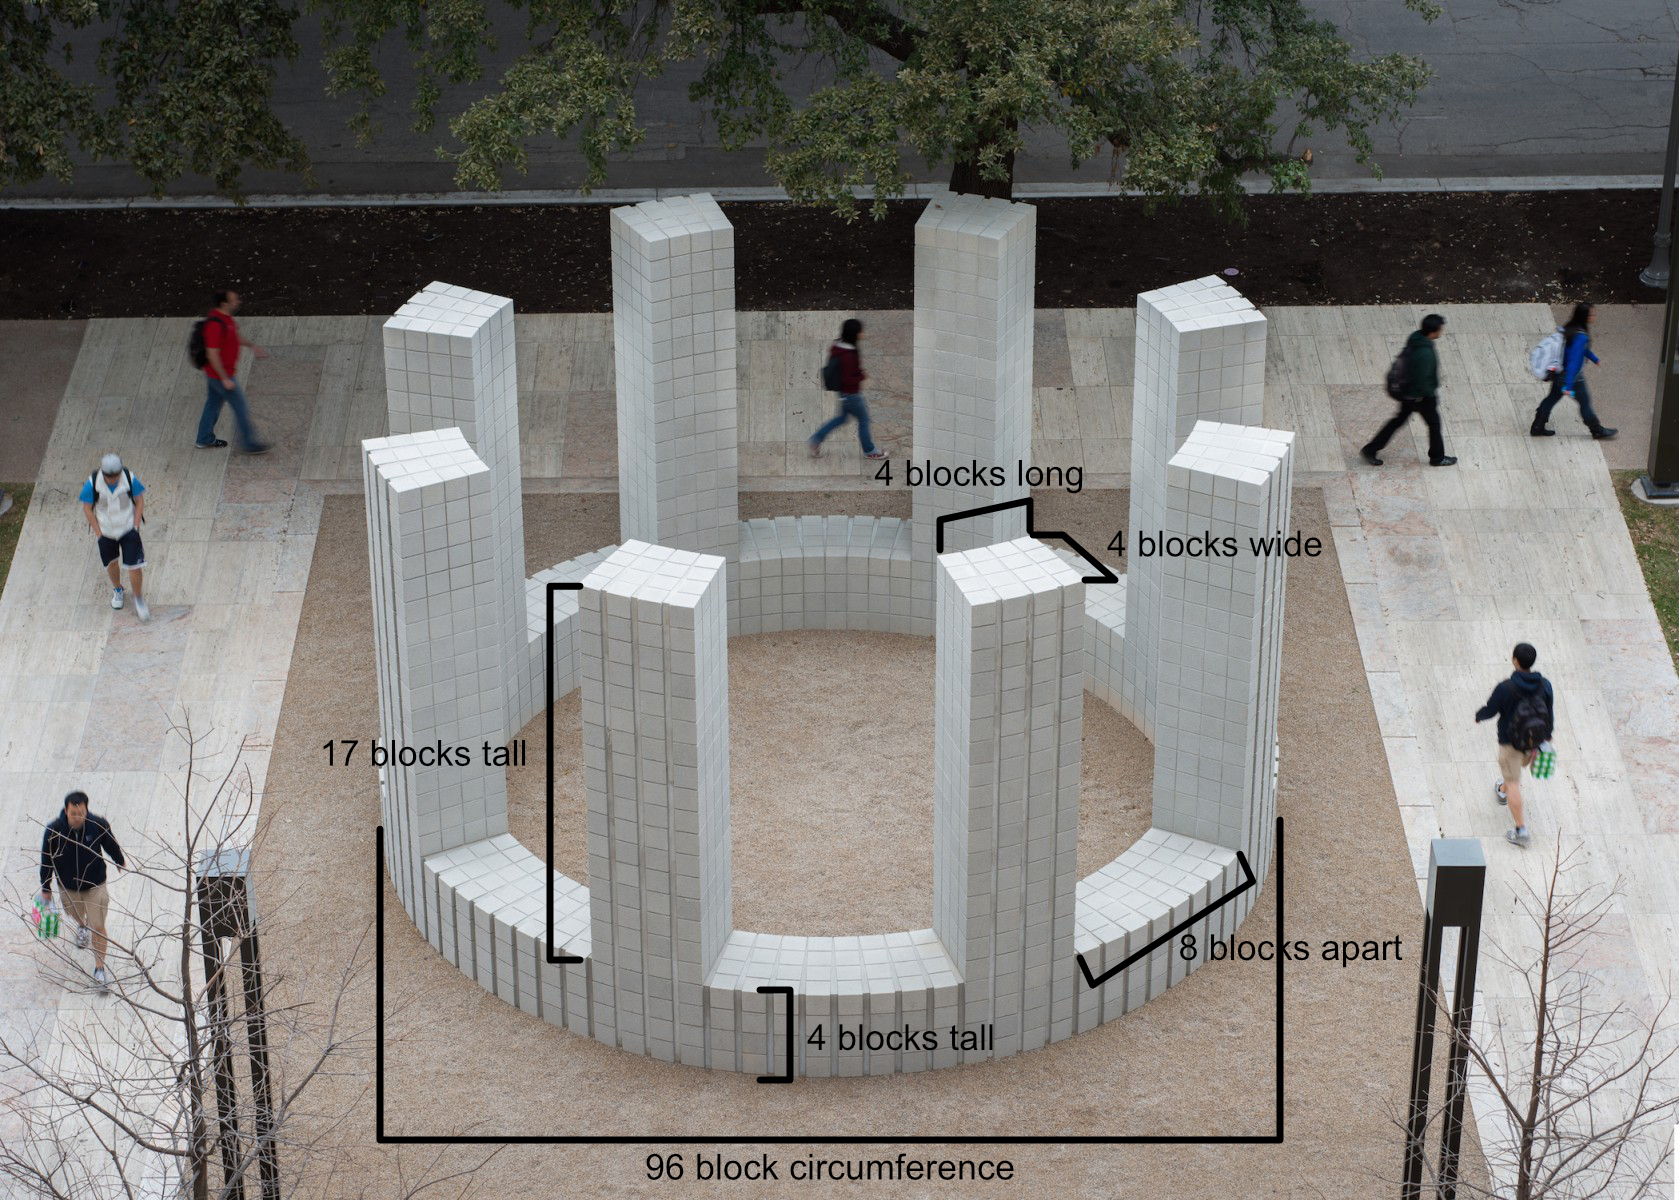 The same picture of the sculpture, but with labeled dimensions listed below